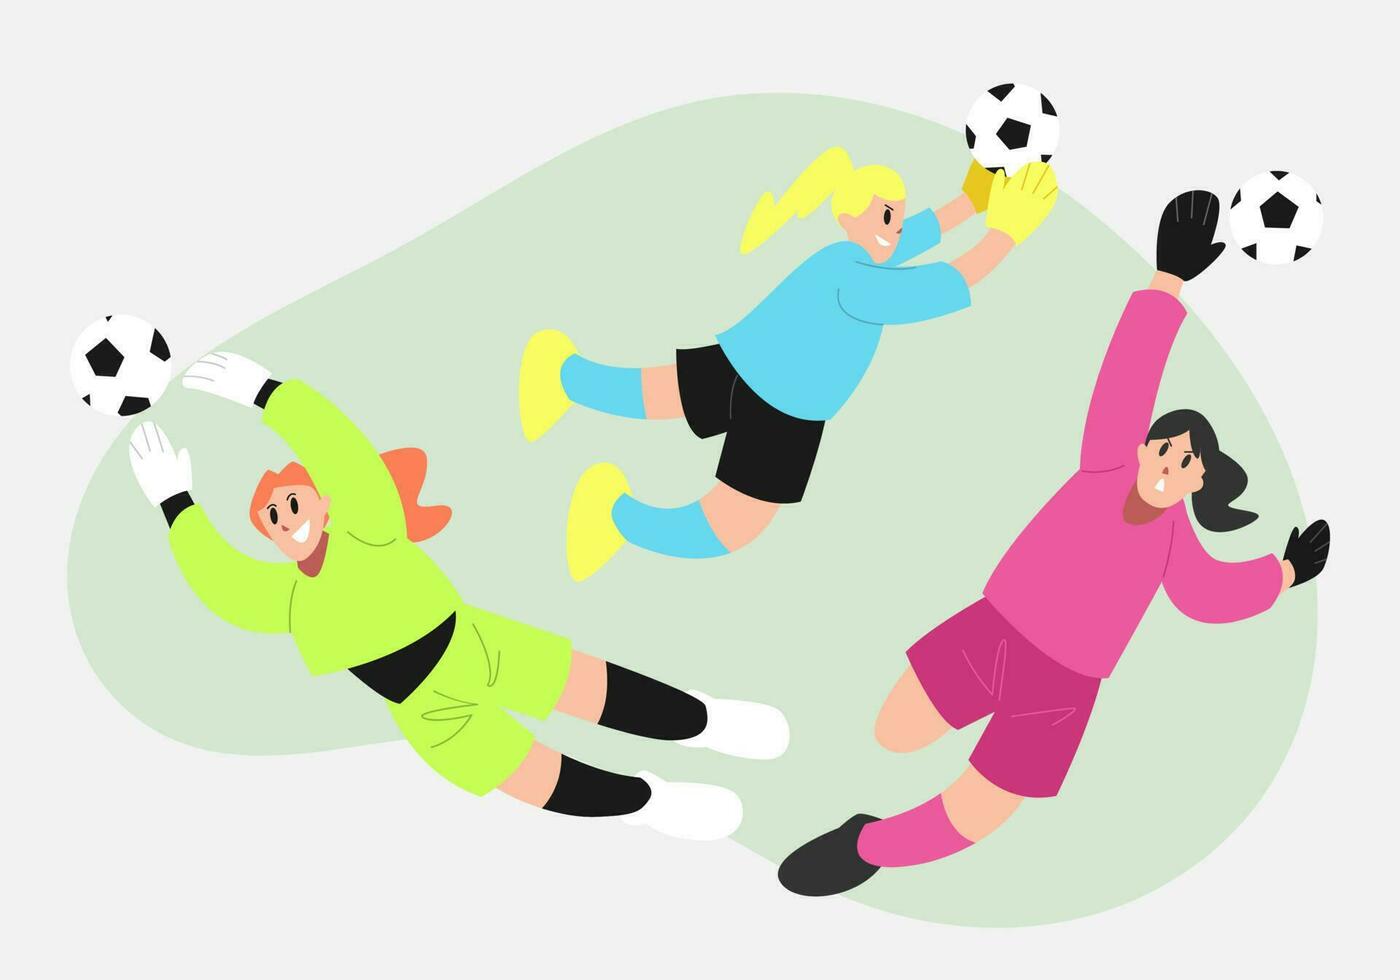 goalkeeper's girls try to catch soccer ball with different style, pose, jersey color Playing soccer, football. flat vector illustration.